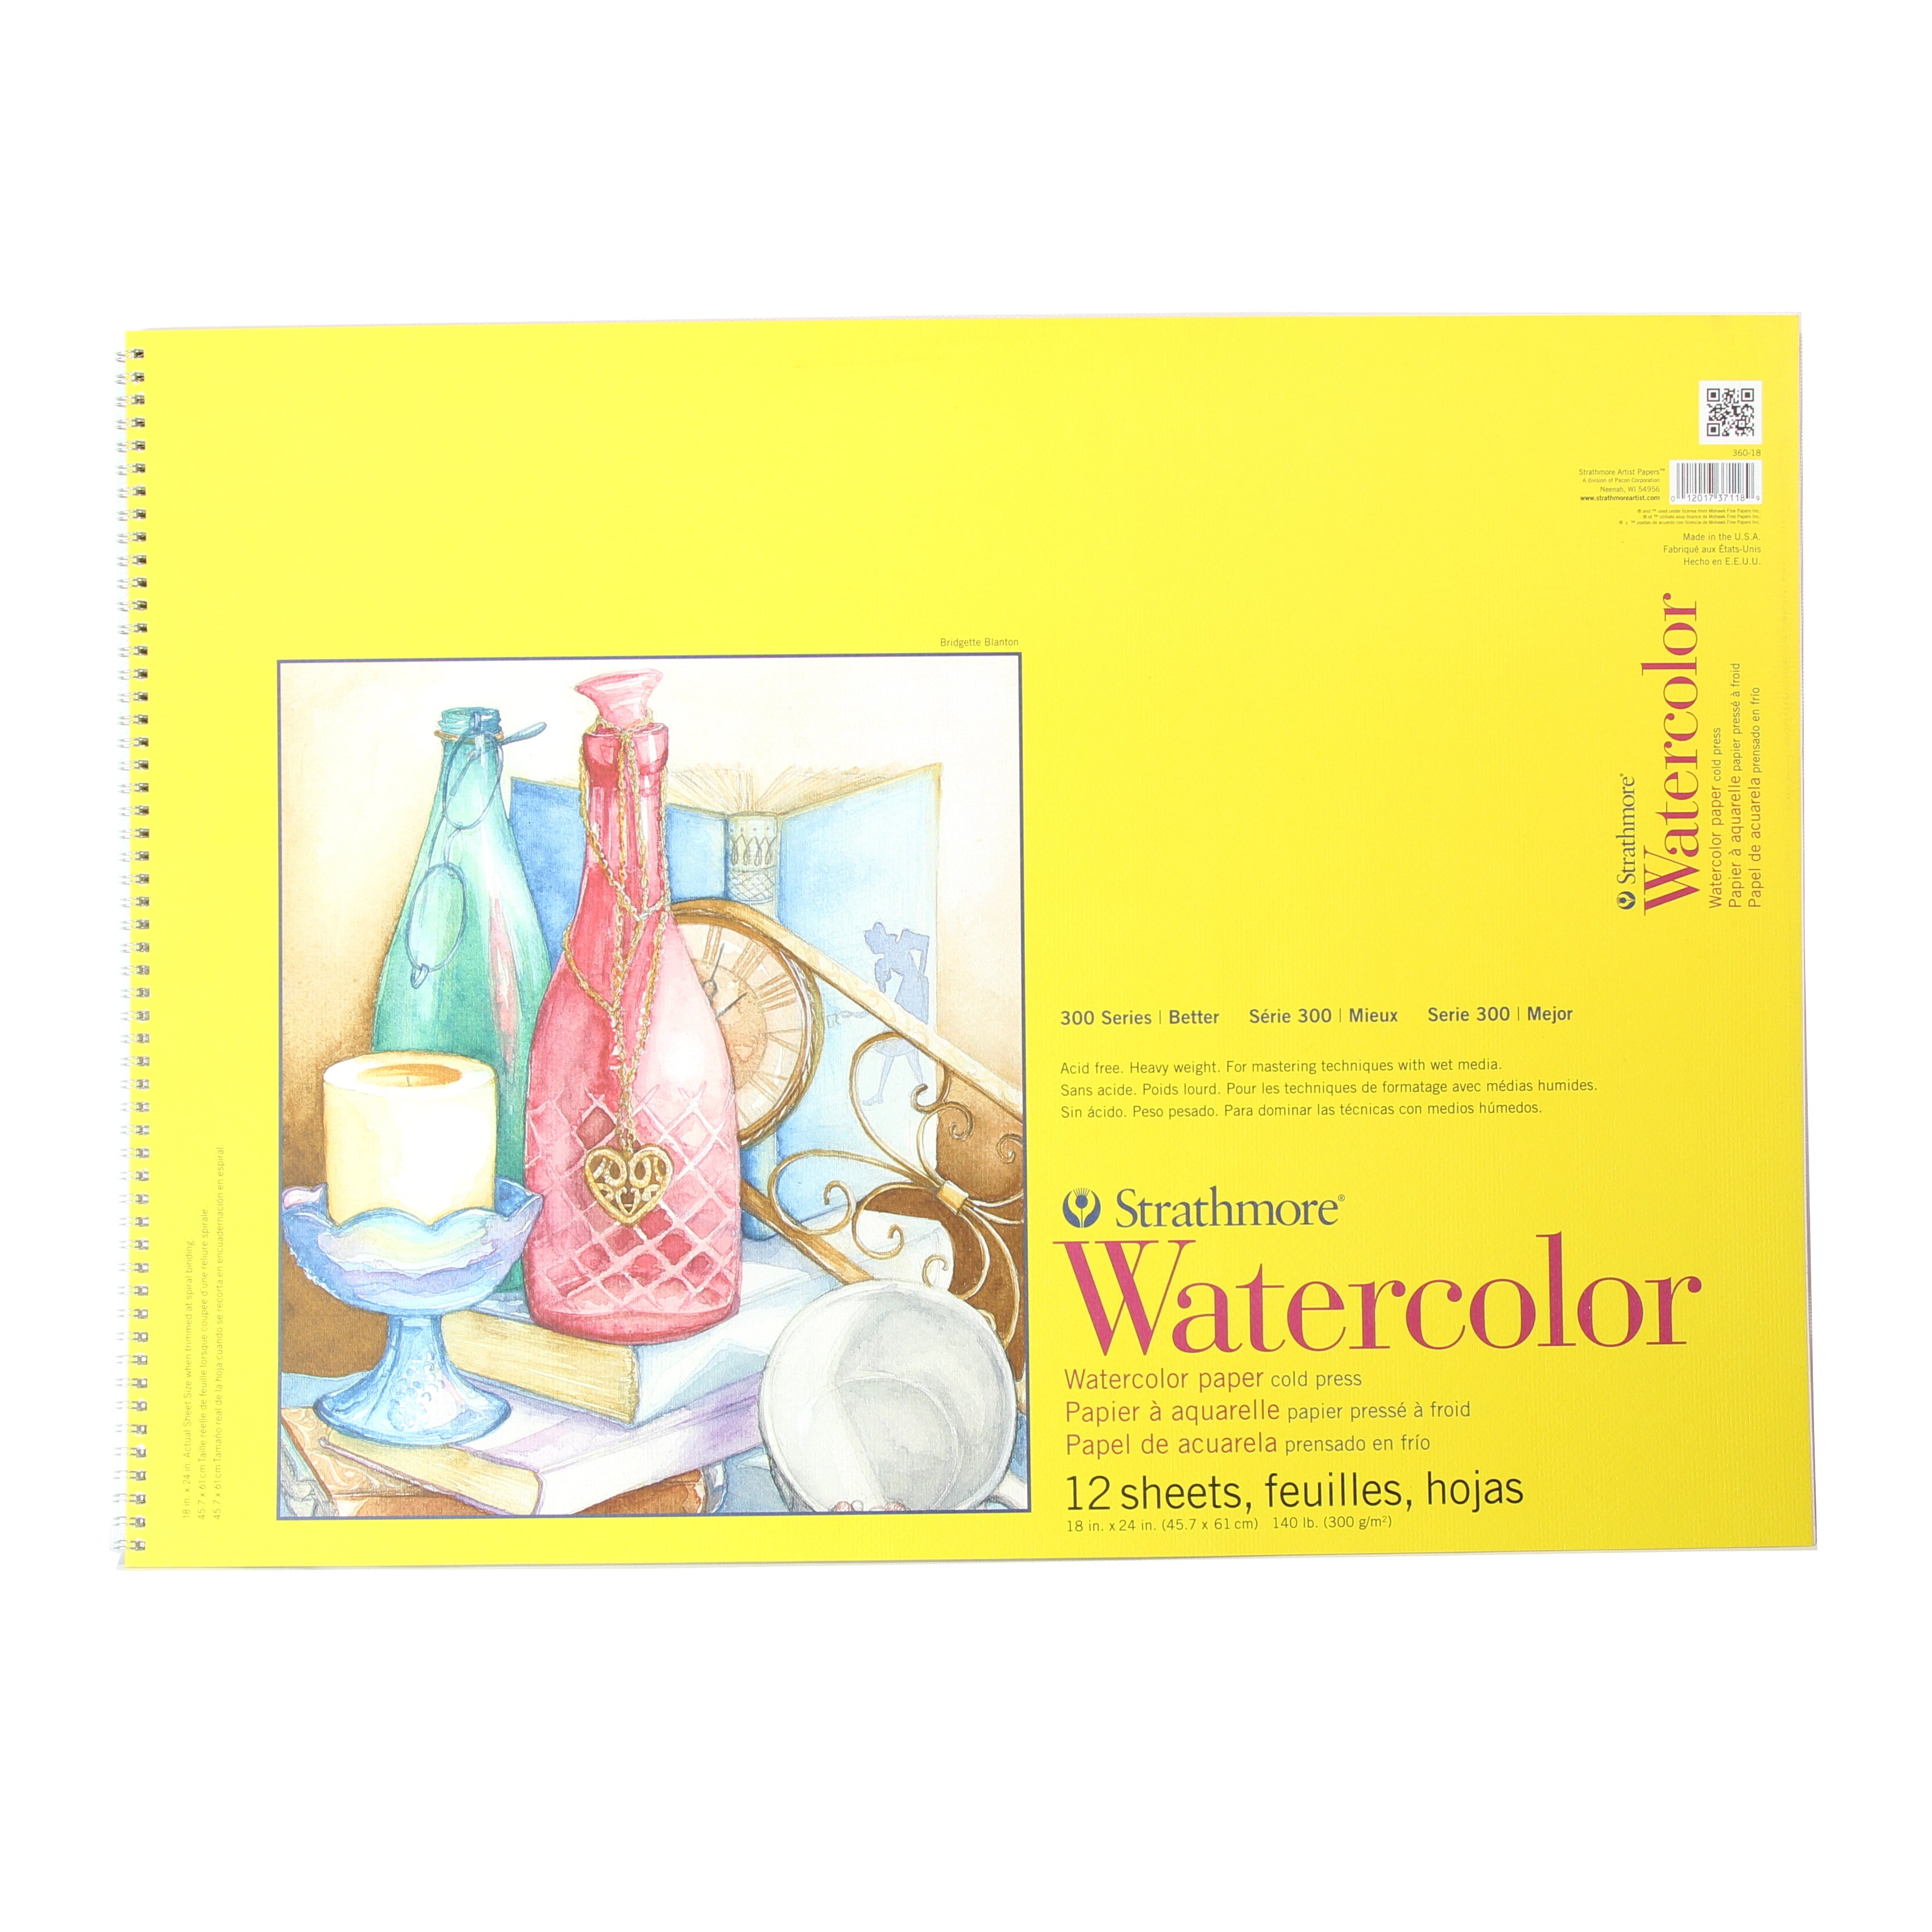 Strathmore Watercolor Paper Pad, 300 Series, Spiral Bound, 12 Sheets